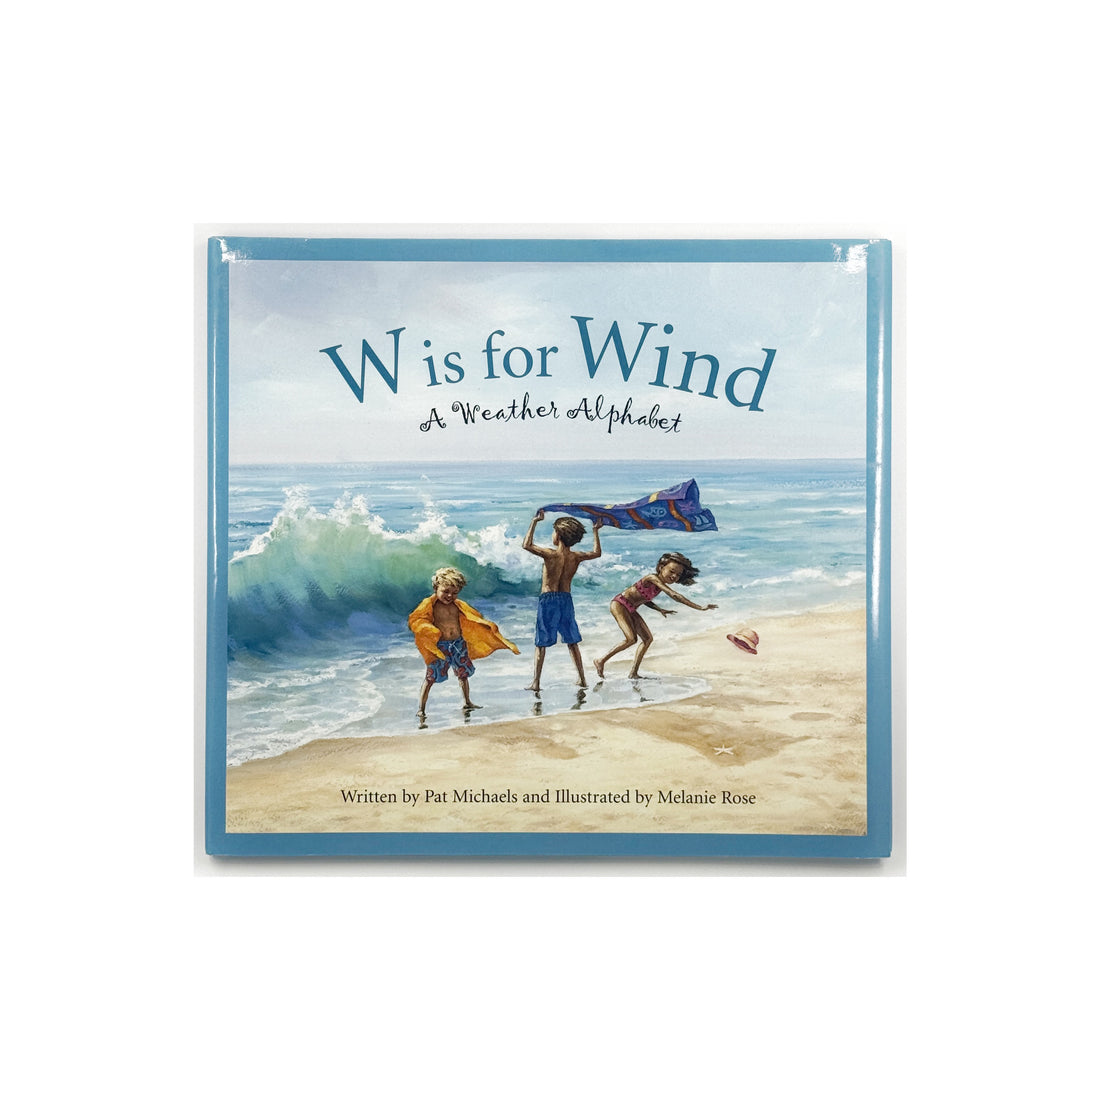 W is for Wind: A Weather Alphabet by Pat Michaels